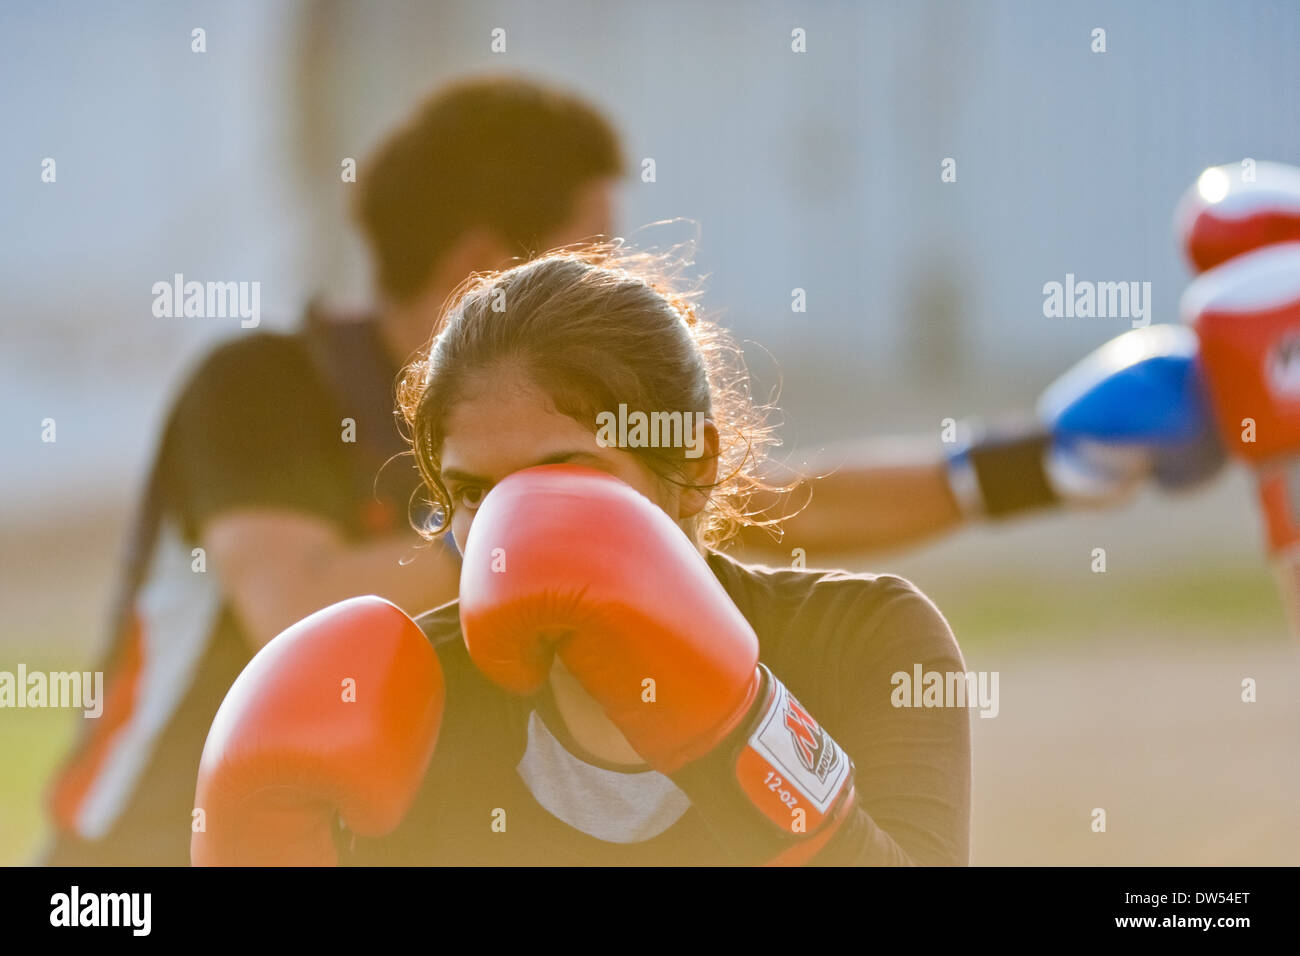 A Peruvian girl practices sparring while training in the outdoor boxing school at the Telmo Carbajo stadium in Callao, Peru. Stock Photo